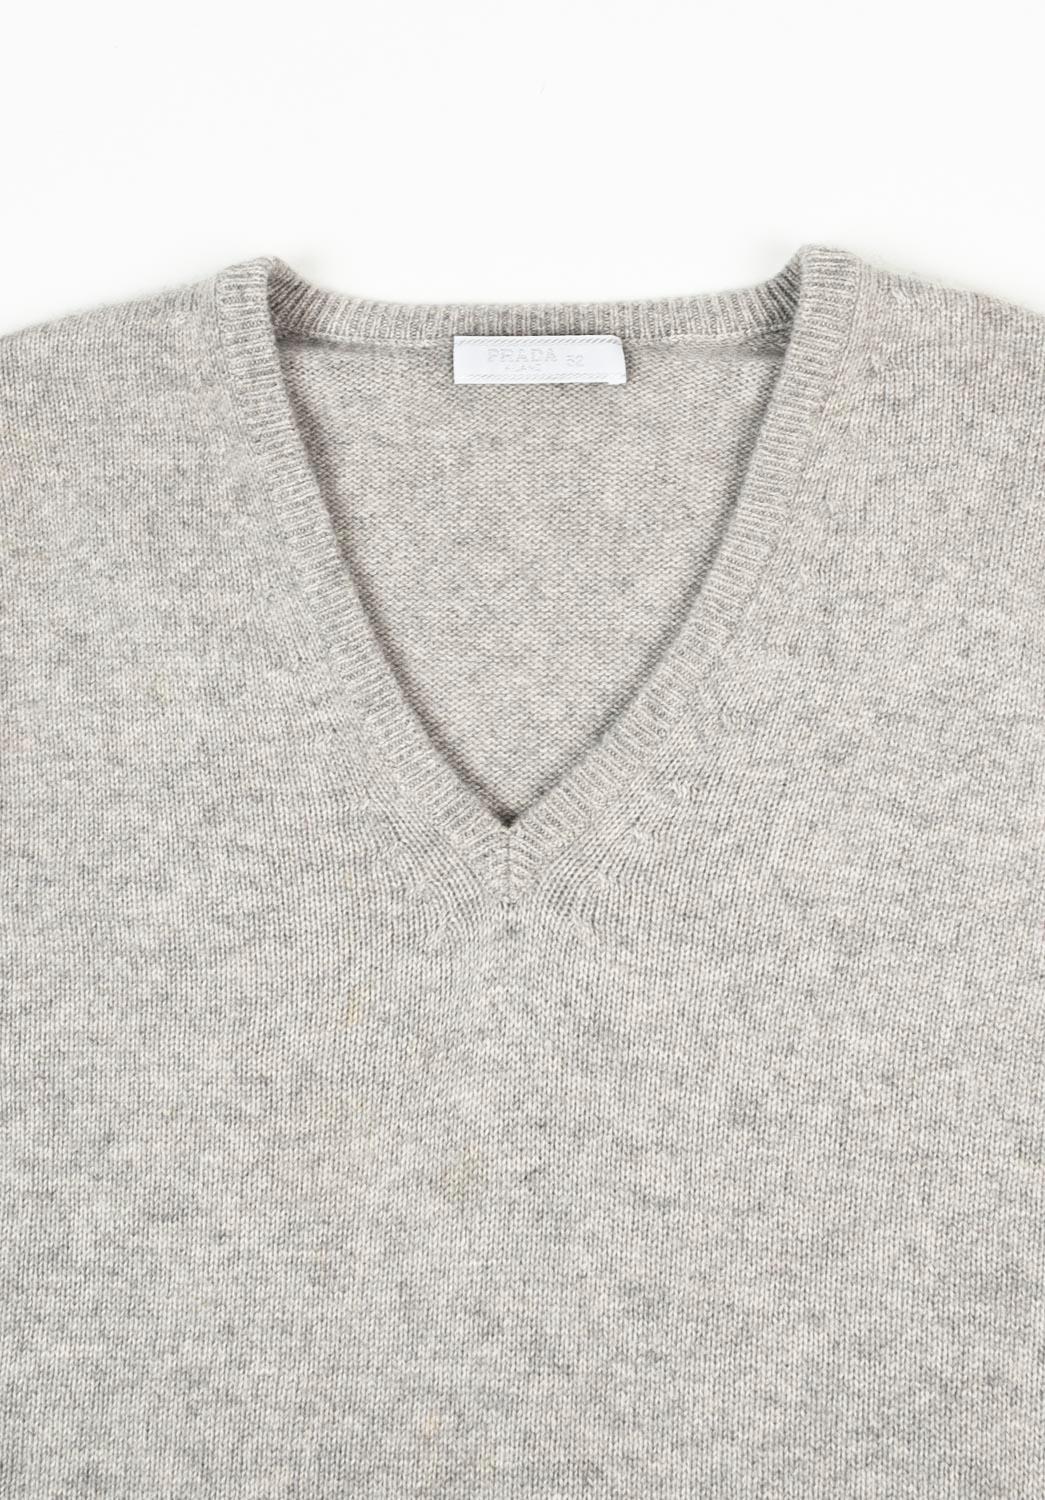 100% genuine Prada Cashmere Men Sweater, S687
Color: grey
(An actual color may a bit vary due to individual computer screen interpretation)
Material: 100% cashmere
Tag size: ITA52, runs Large
This sweater is great quality item. Rate 9 of 10,